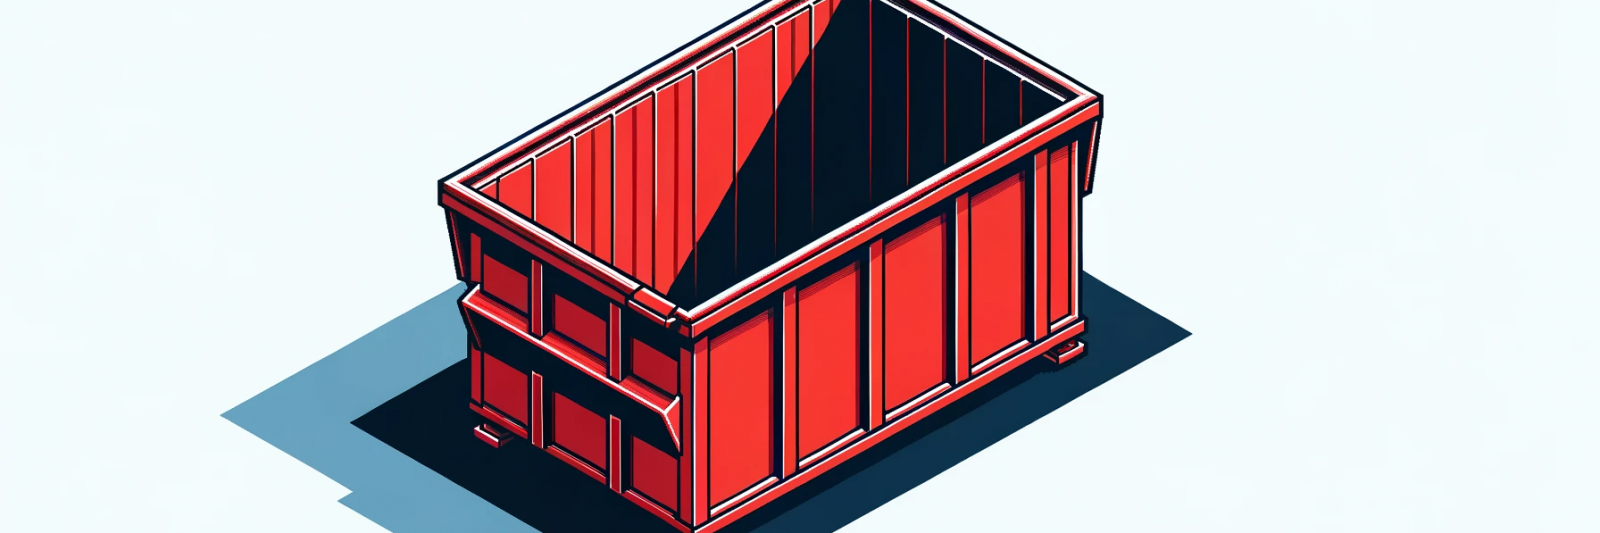 Isometric illustration of a red dumpster